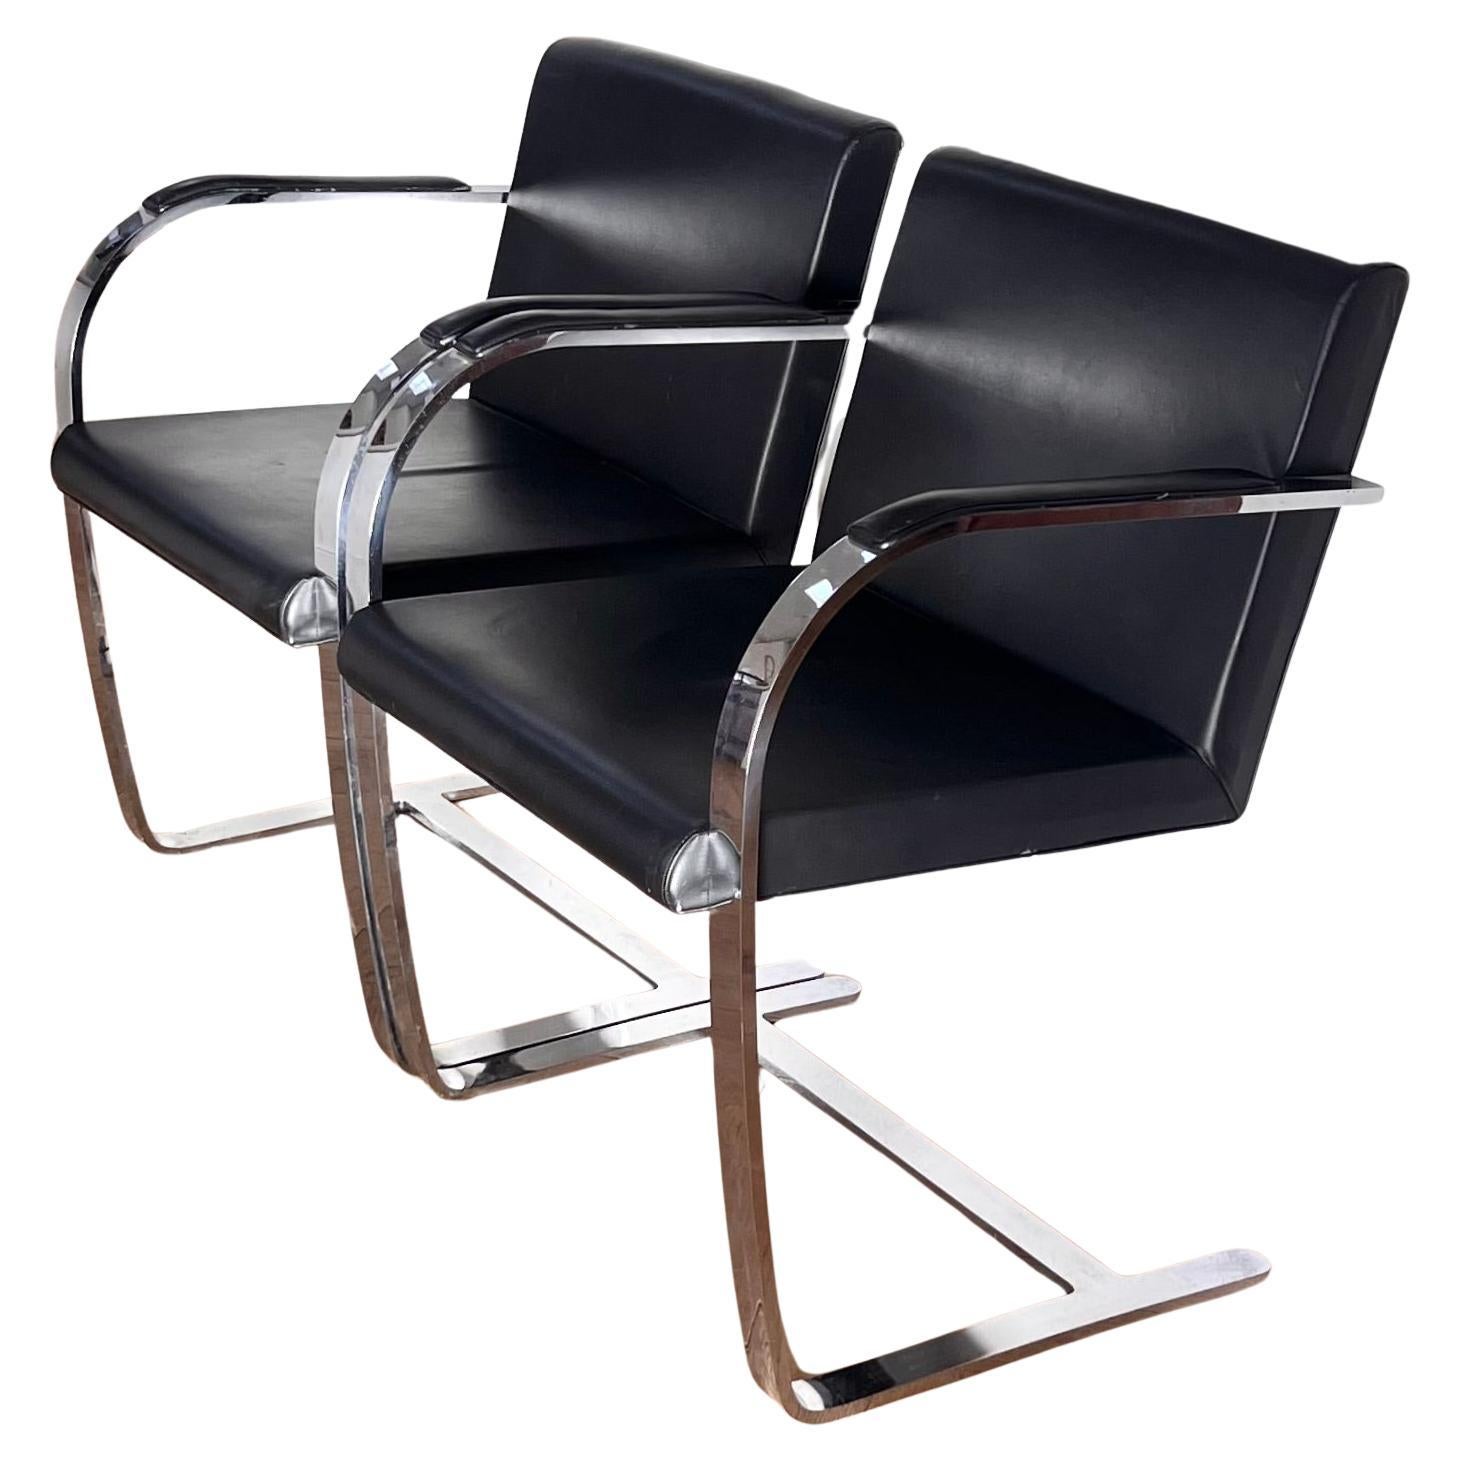 Pair of Mies van der Rohe Brno chairs by Palazzetti, 1970s For Sale